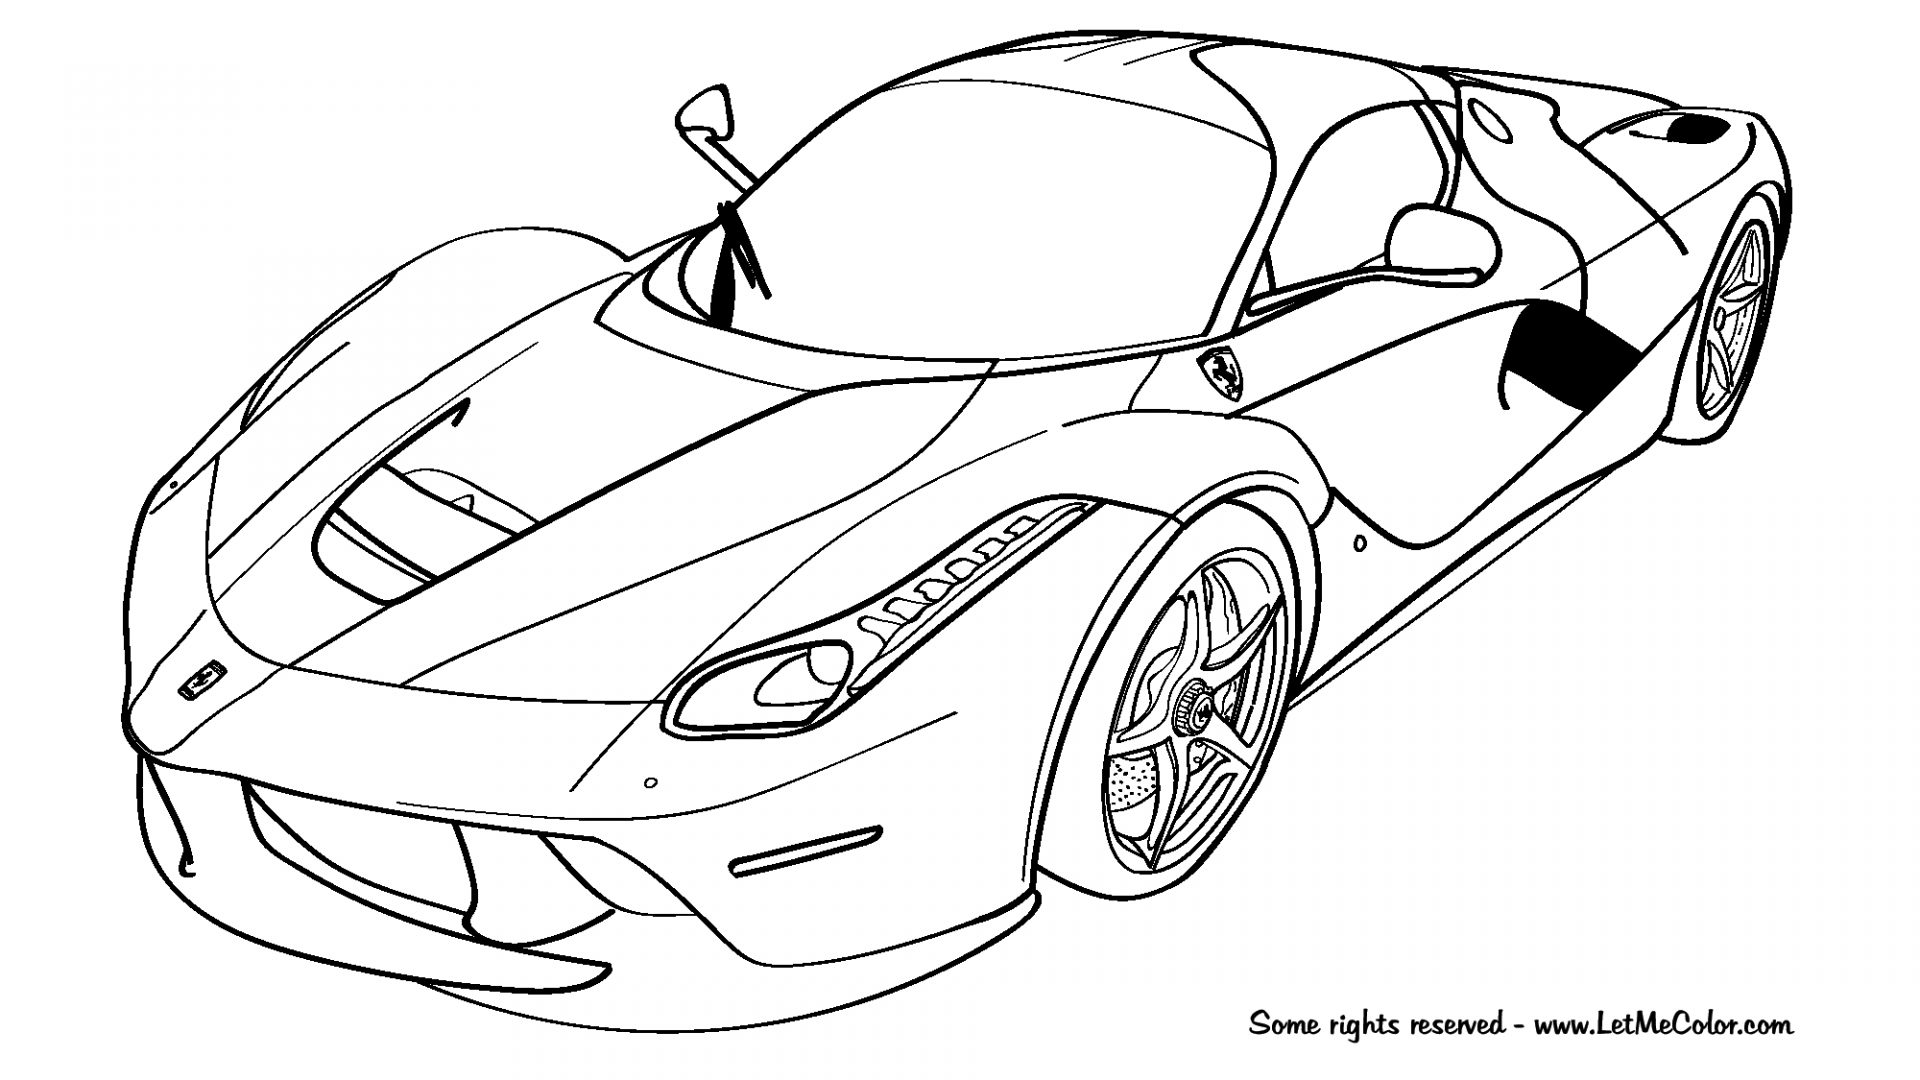 Corvette Coloring Pages at GetColorings com Free printable colorings